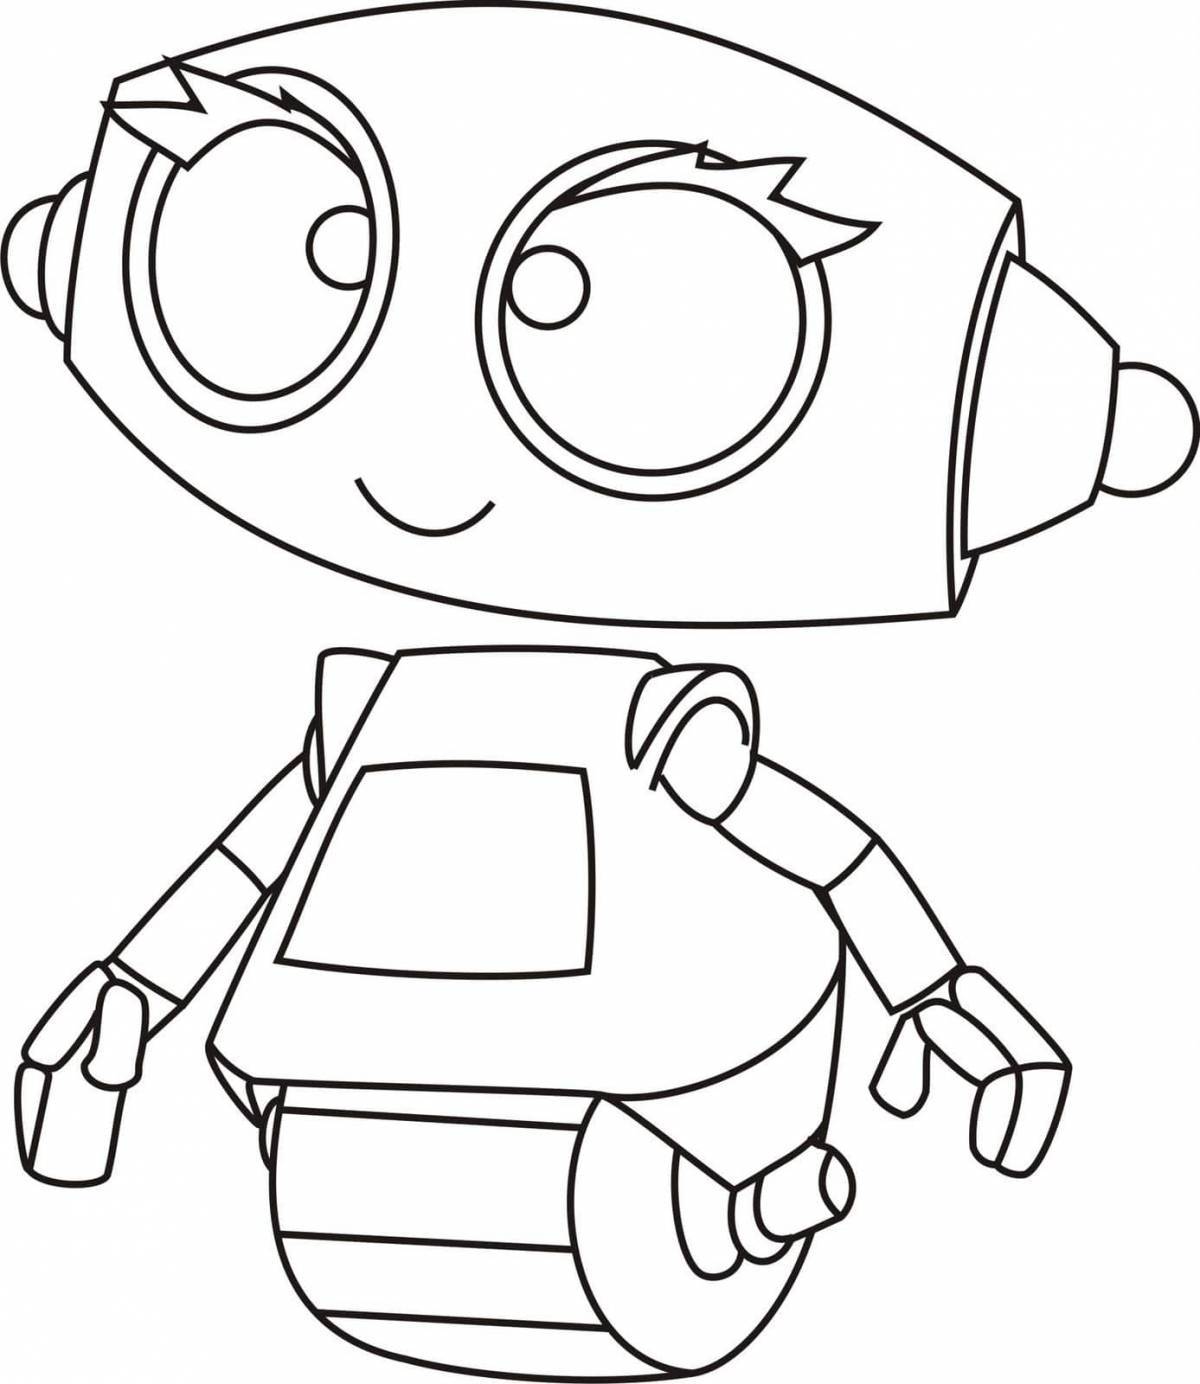 Coloring robots for children 5-6 years old